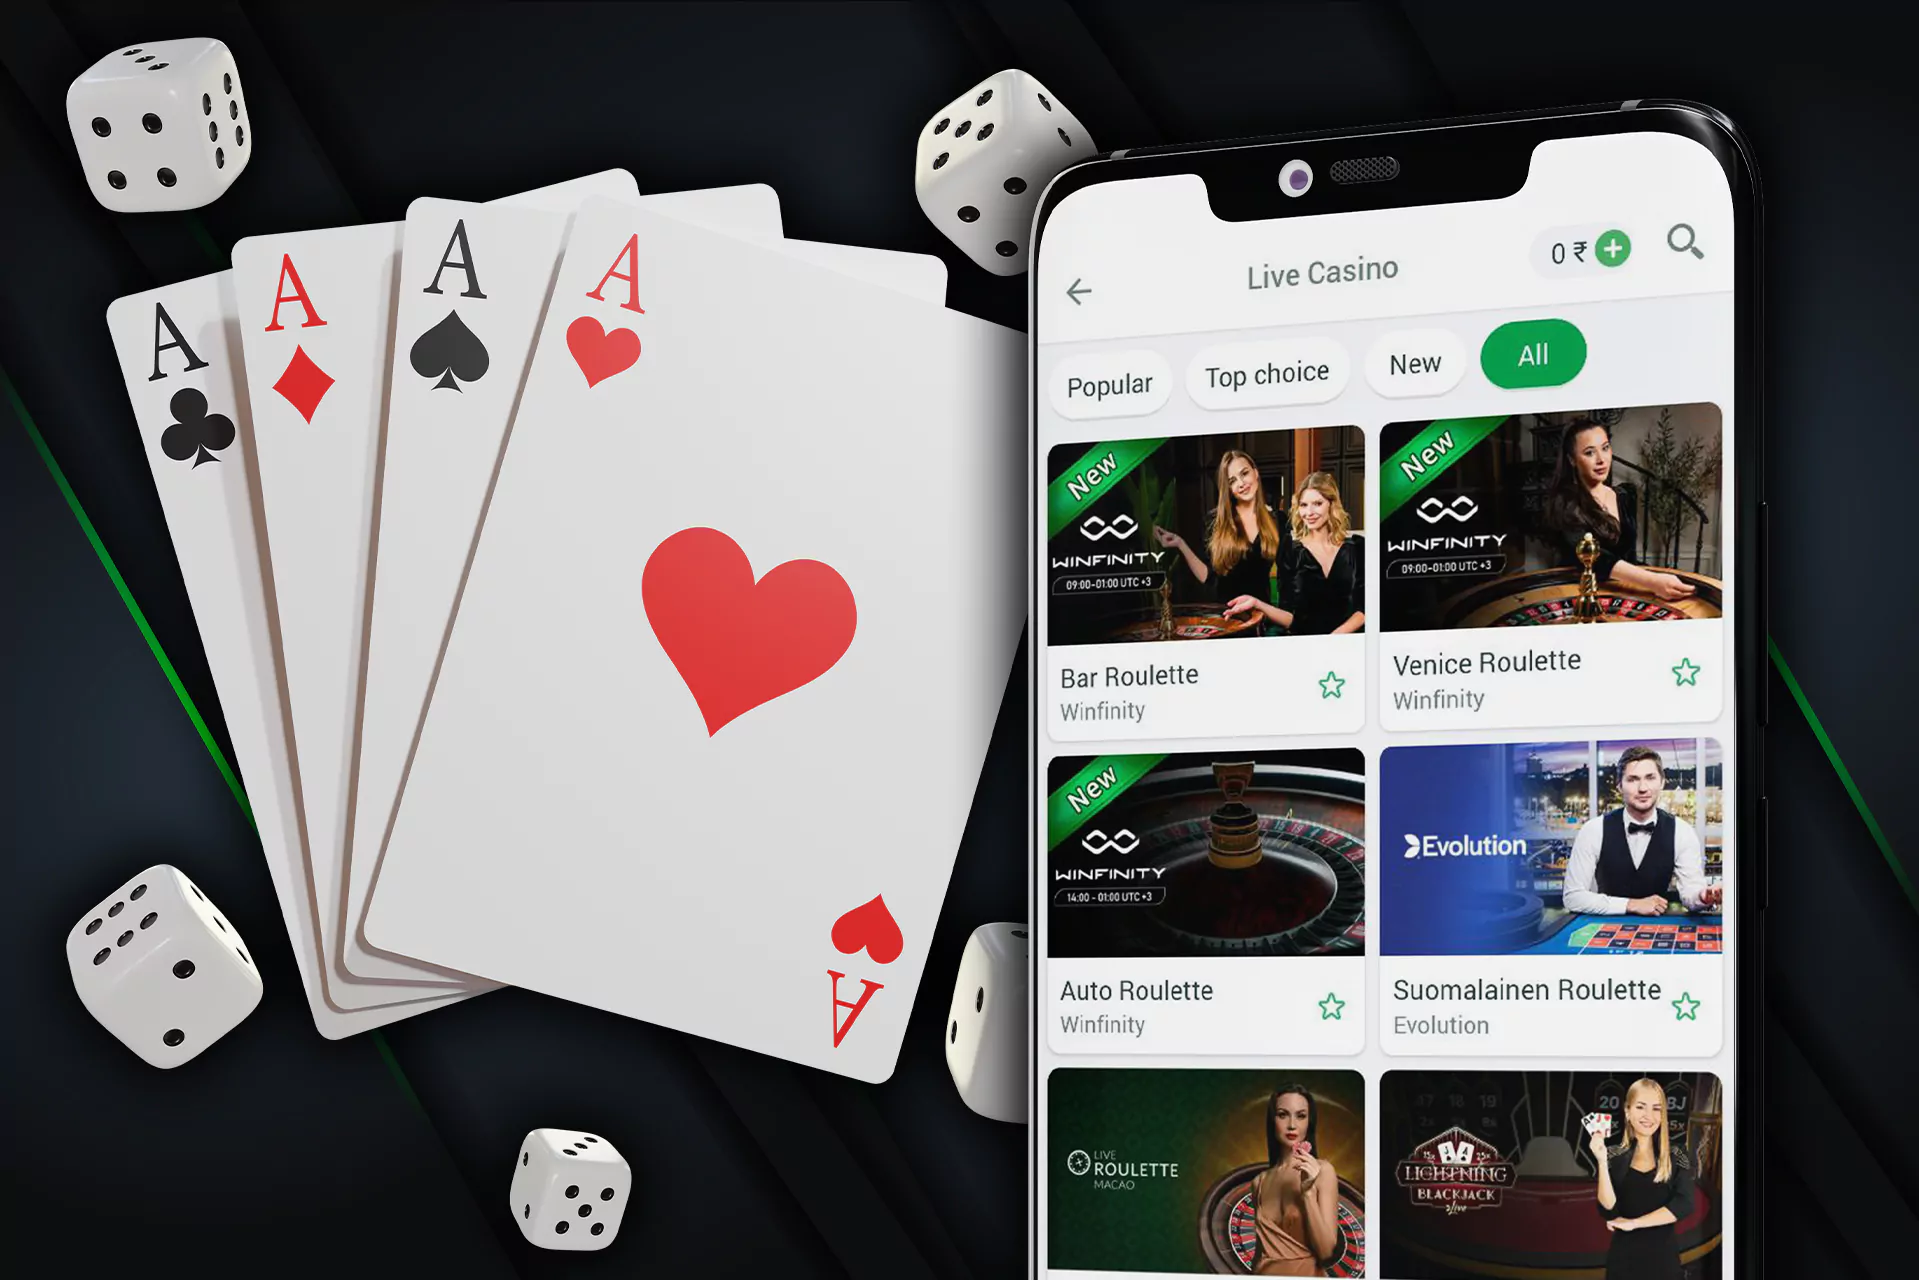 There is also a mobile casino that you can play in the Linevet app.